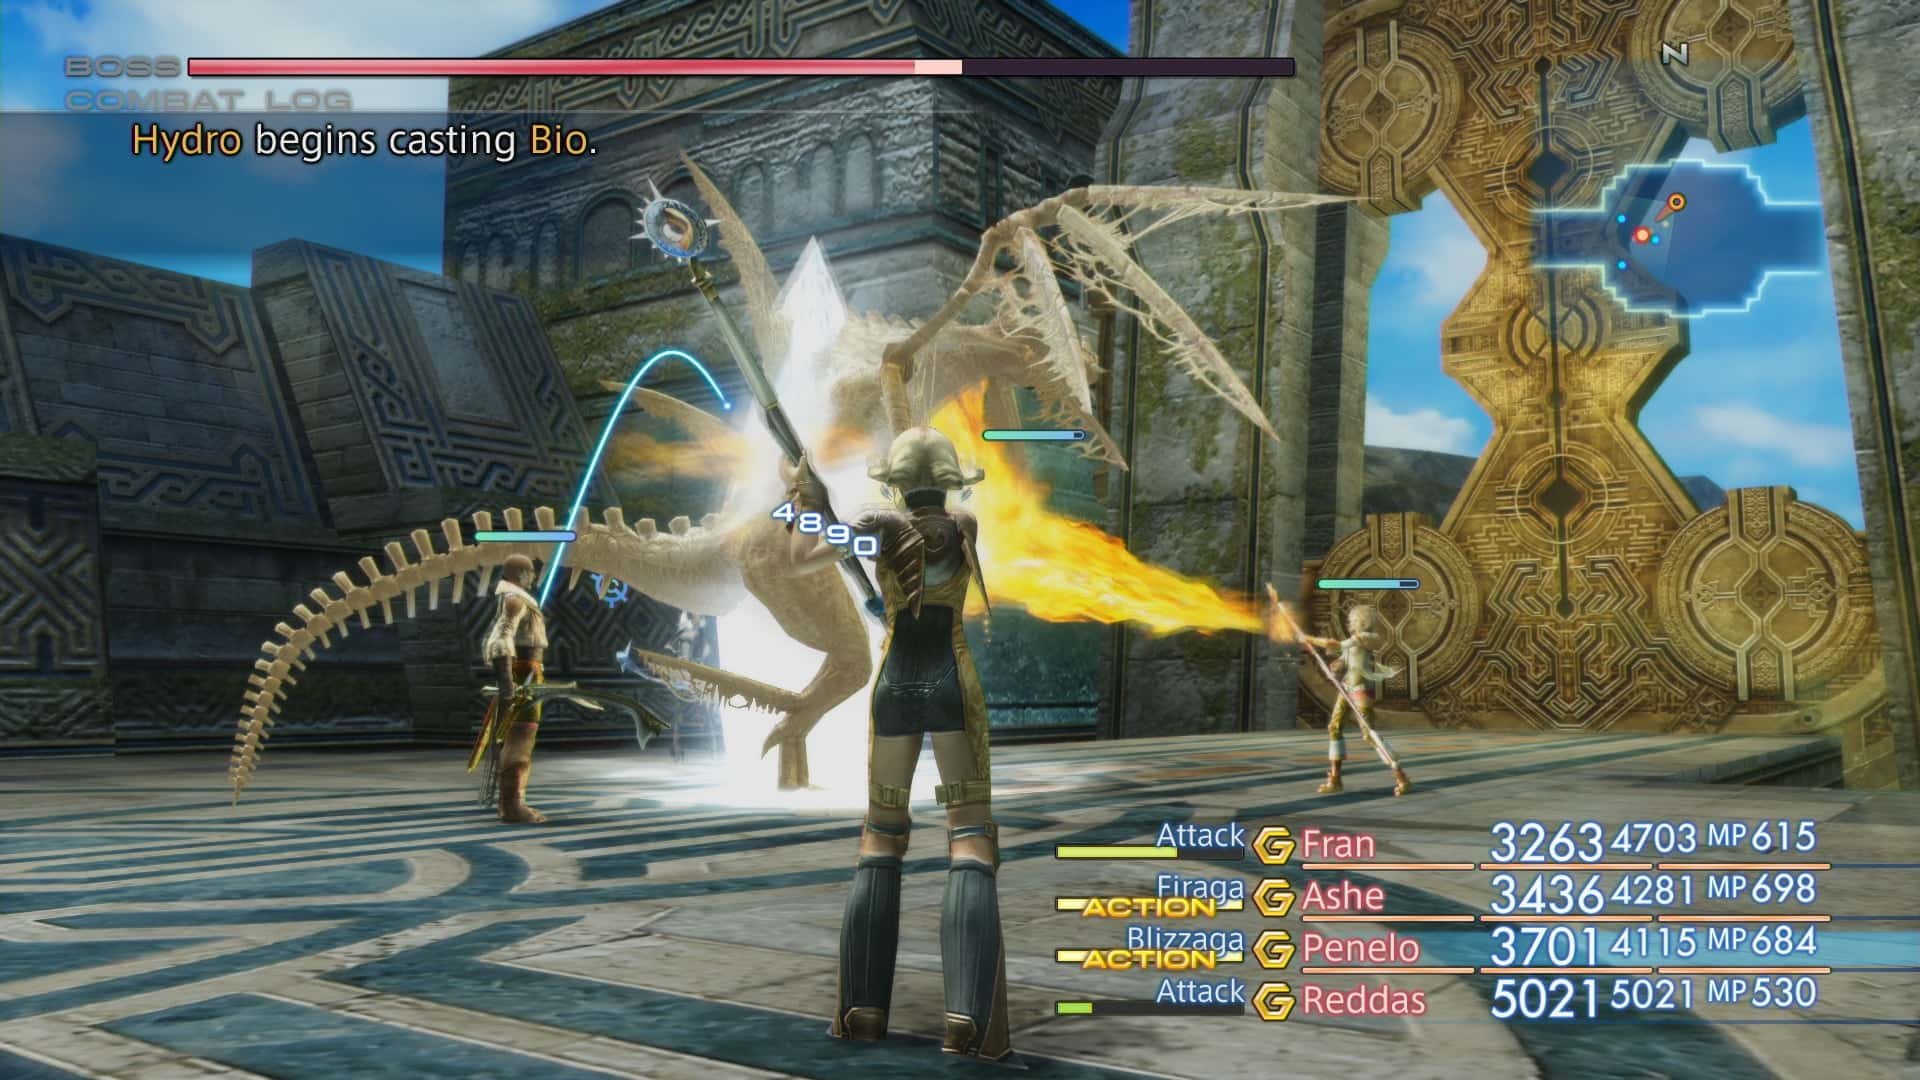 Can I Play Final Fantasy Xiii On Ps4?